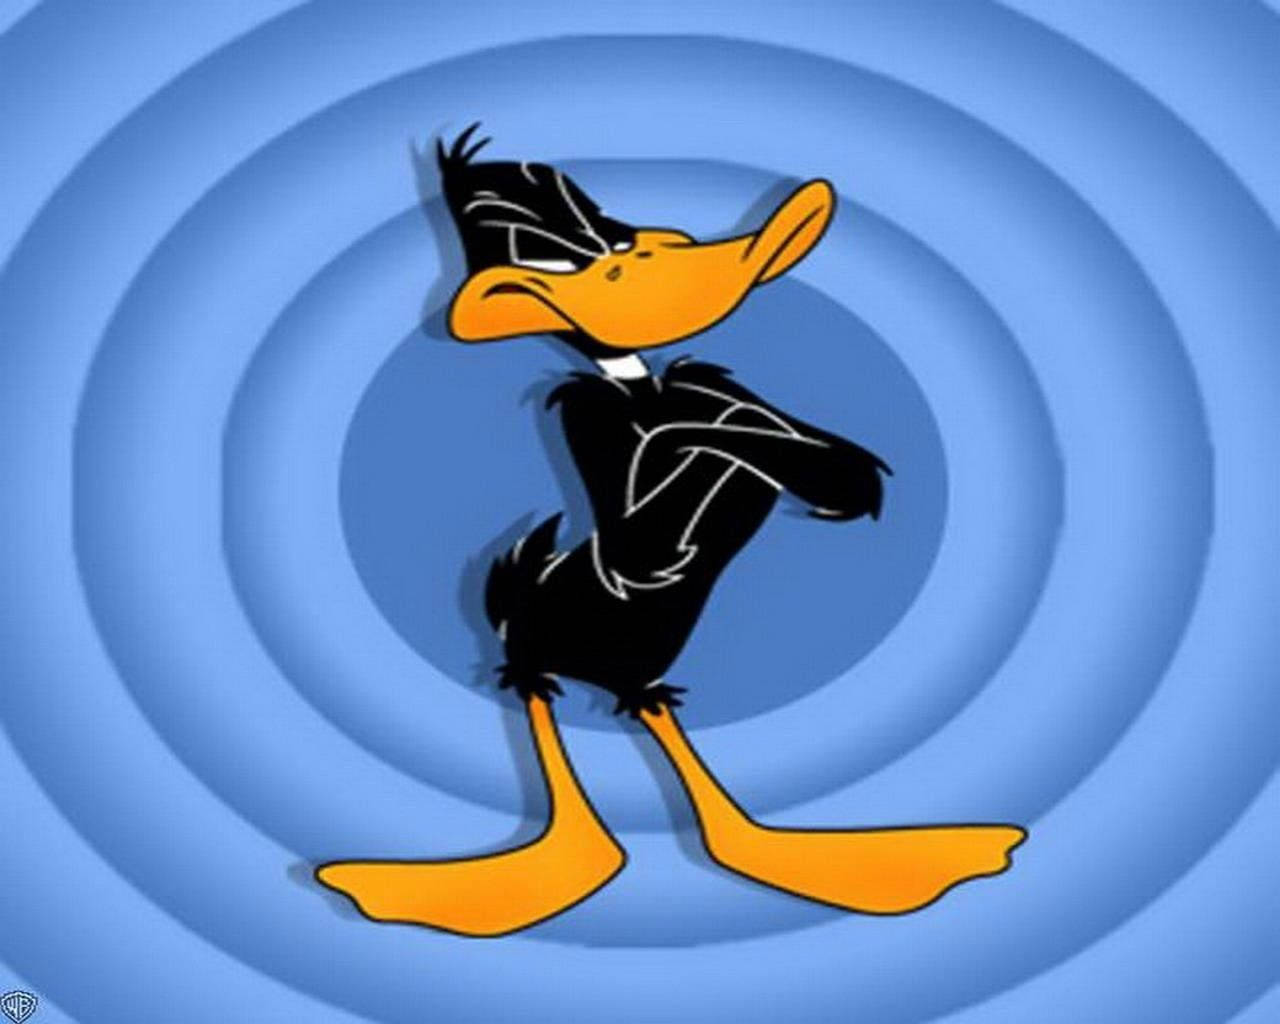 Sinister Look Of Daffy Duck